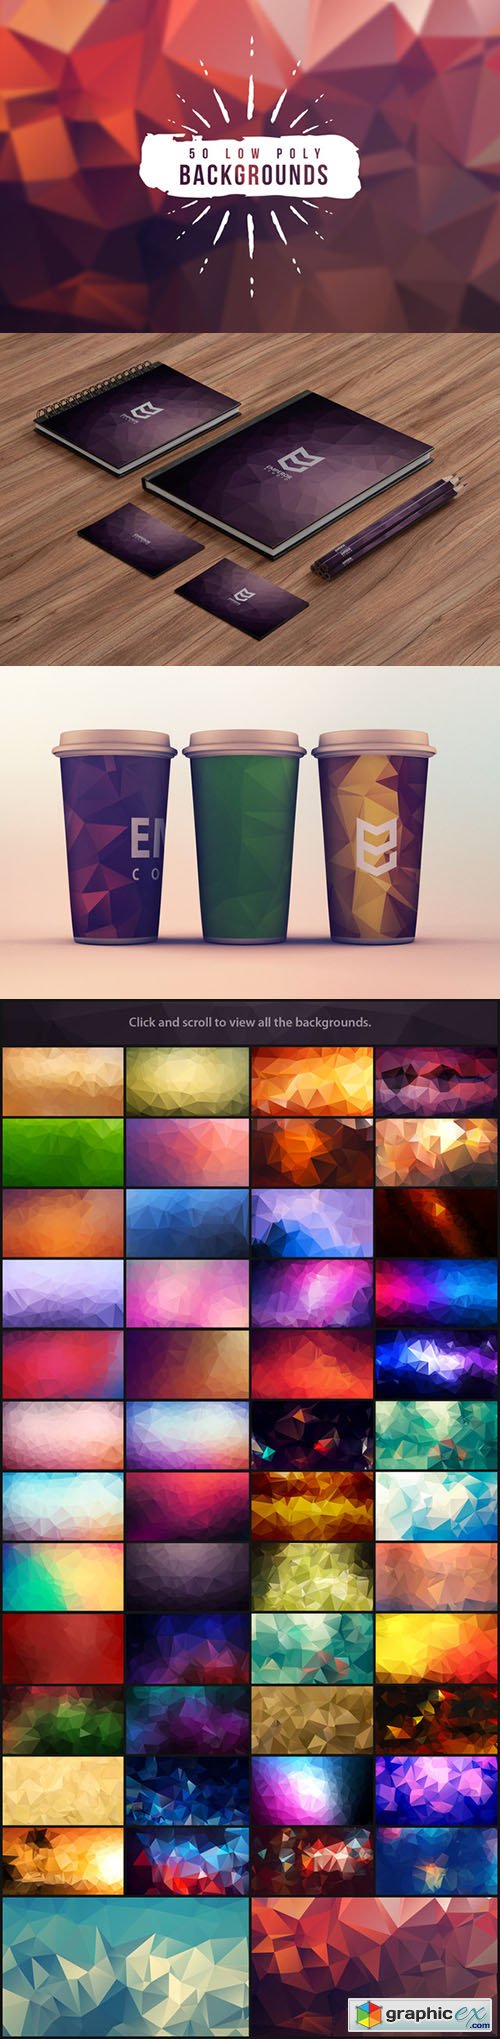 50 Low Poly Backgrounds